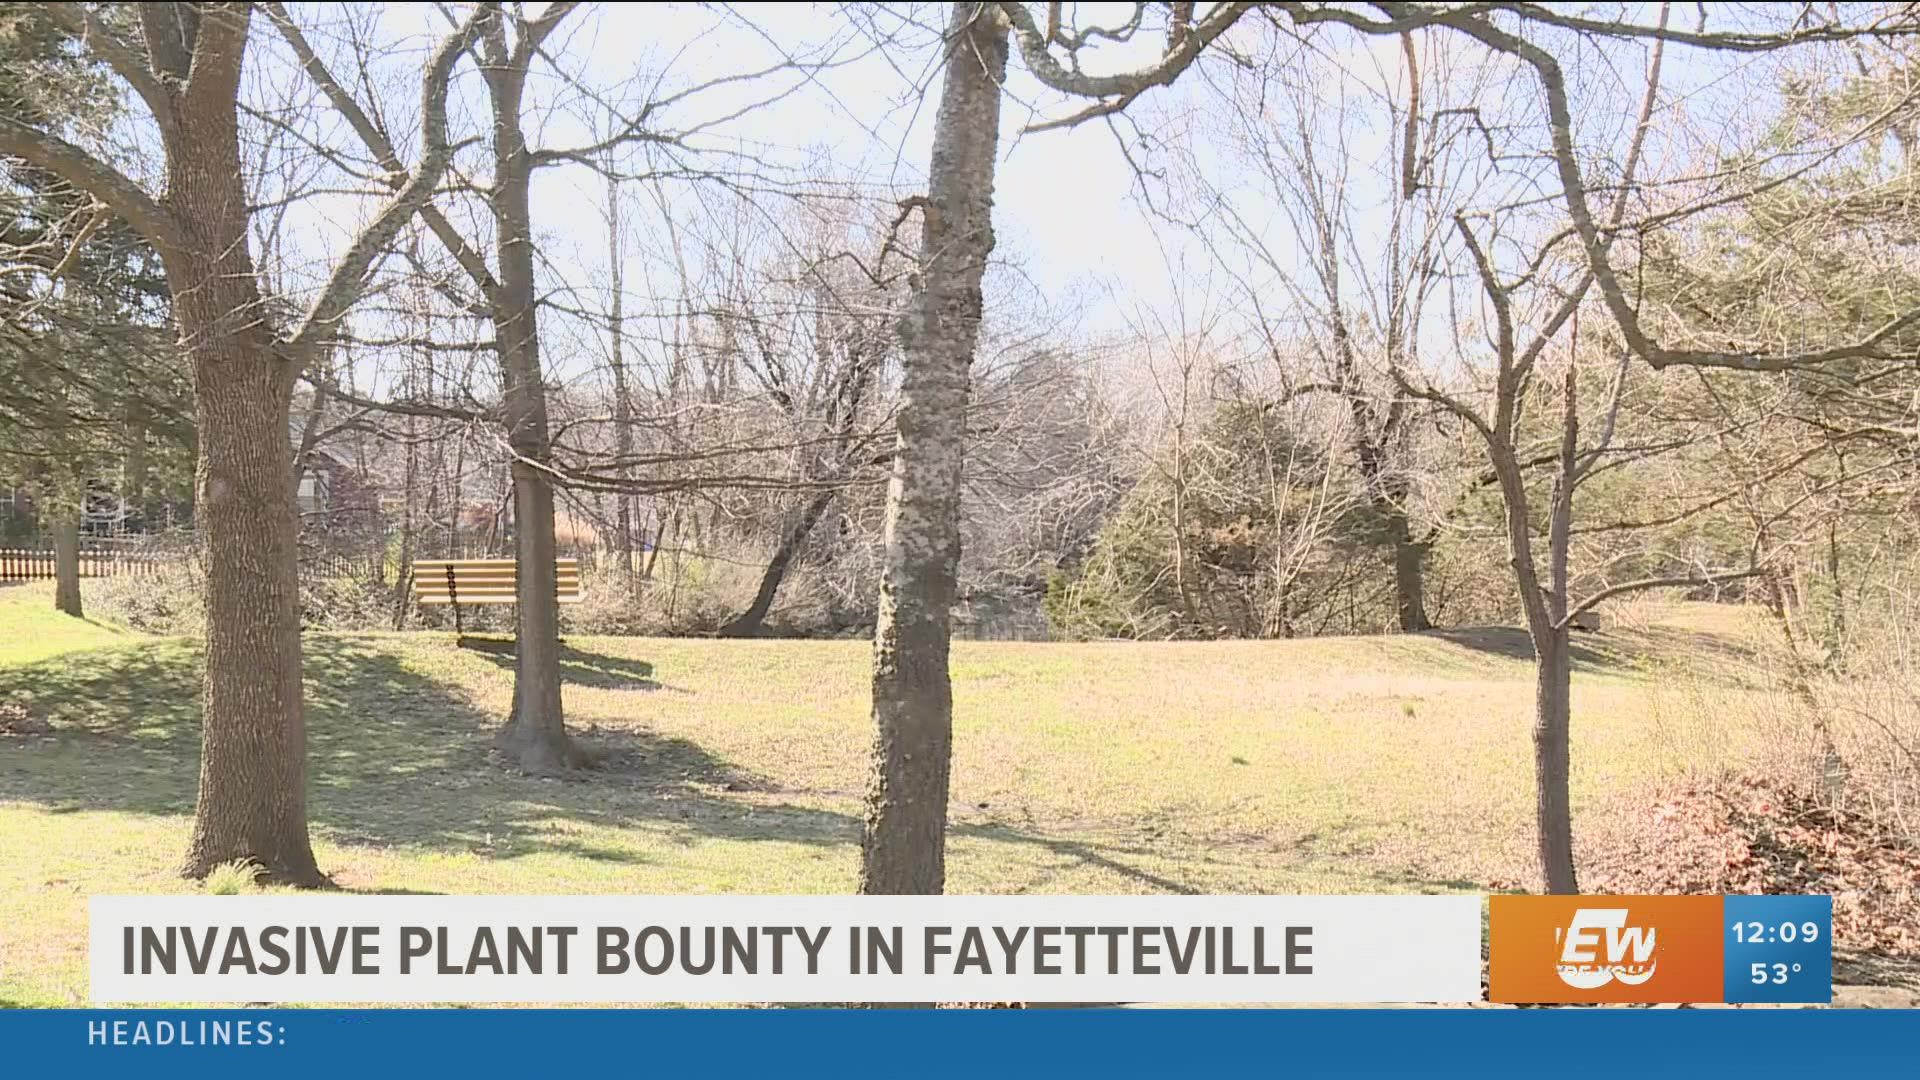 This spring, the City's invasive plant "bounty" program will replace residents’ invasive plants with a native tree or shrub for free.